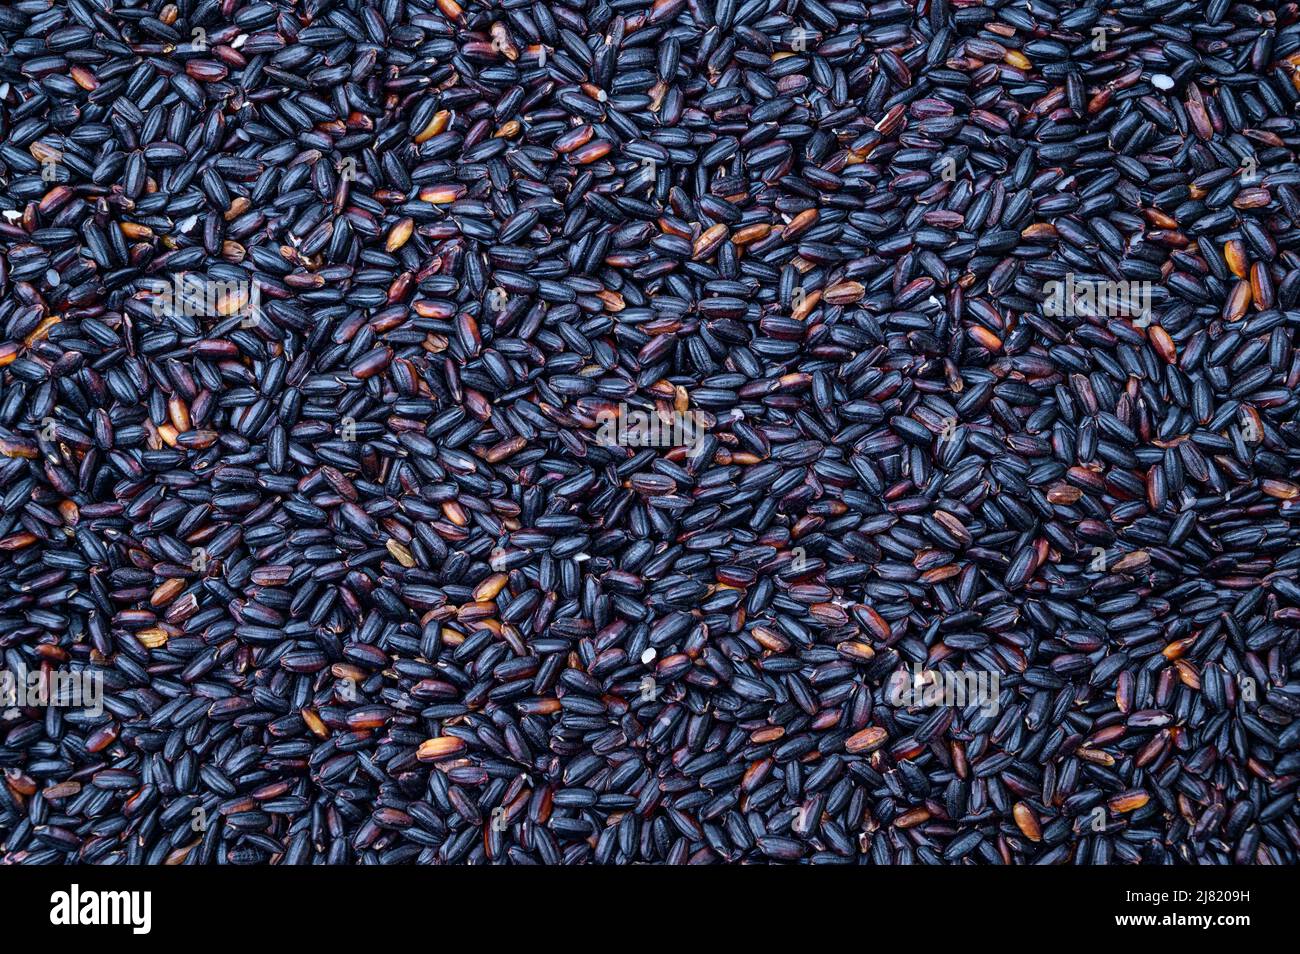 Black rice top view background. Grain background. Stock Photo